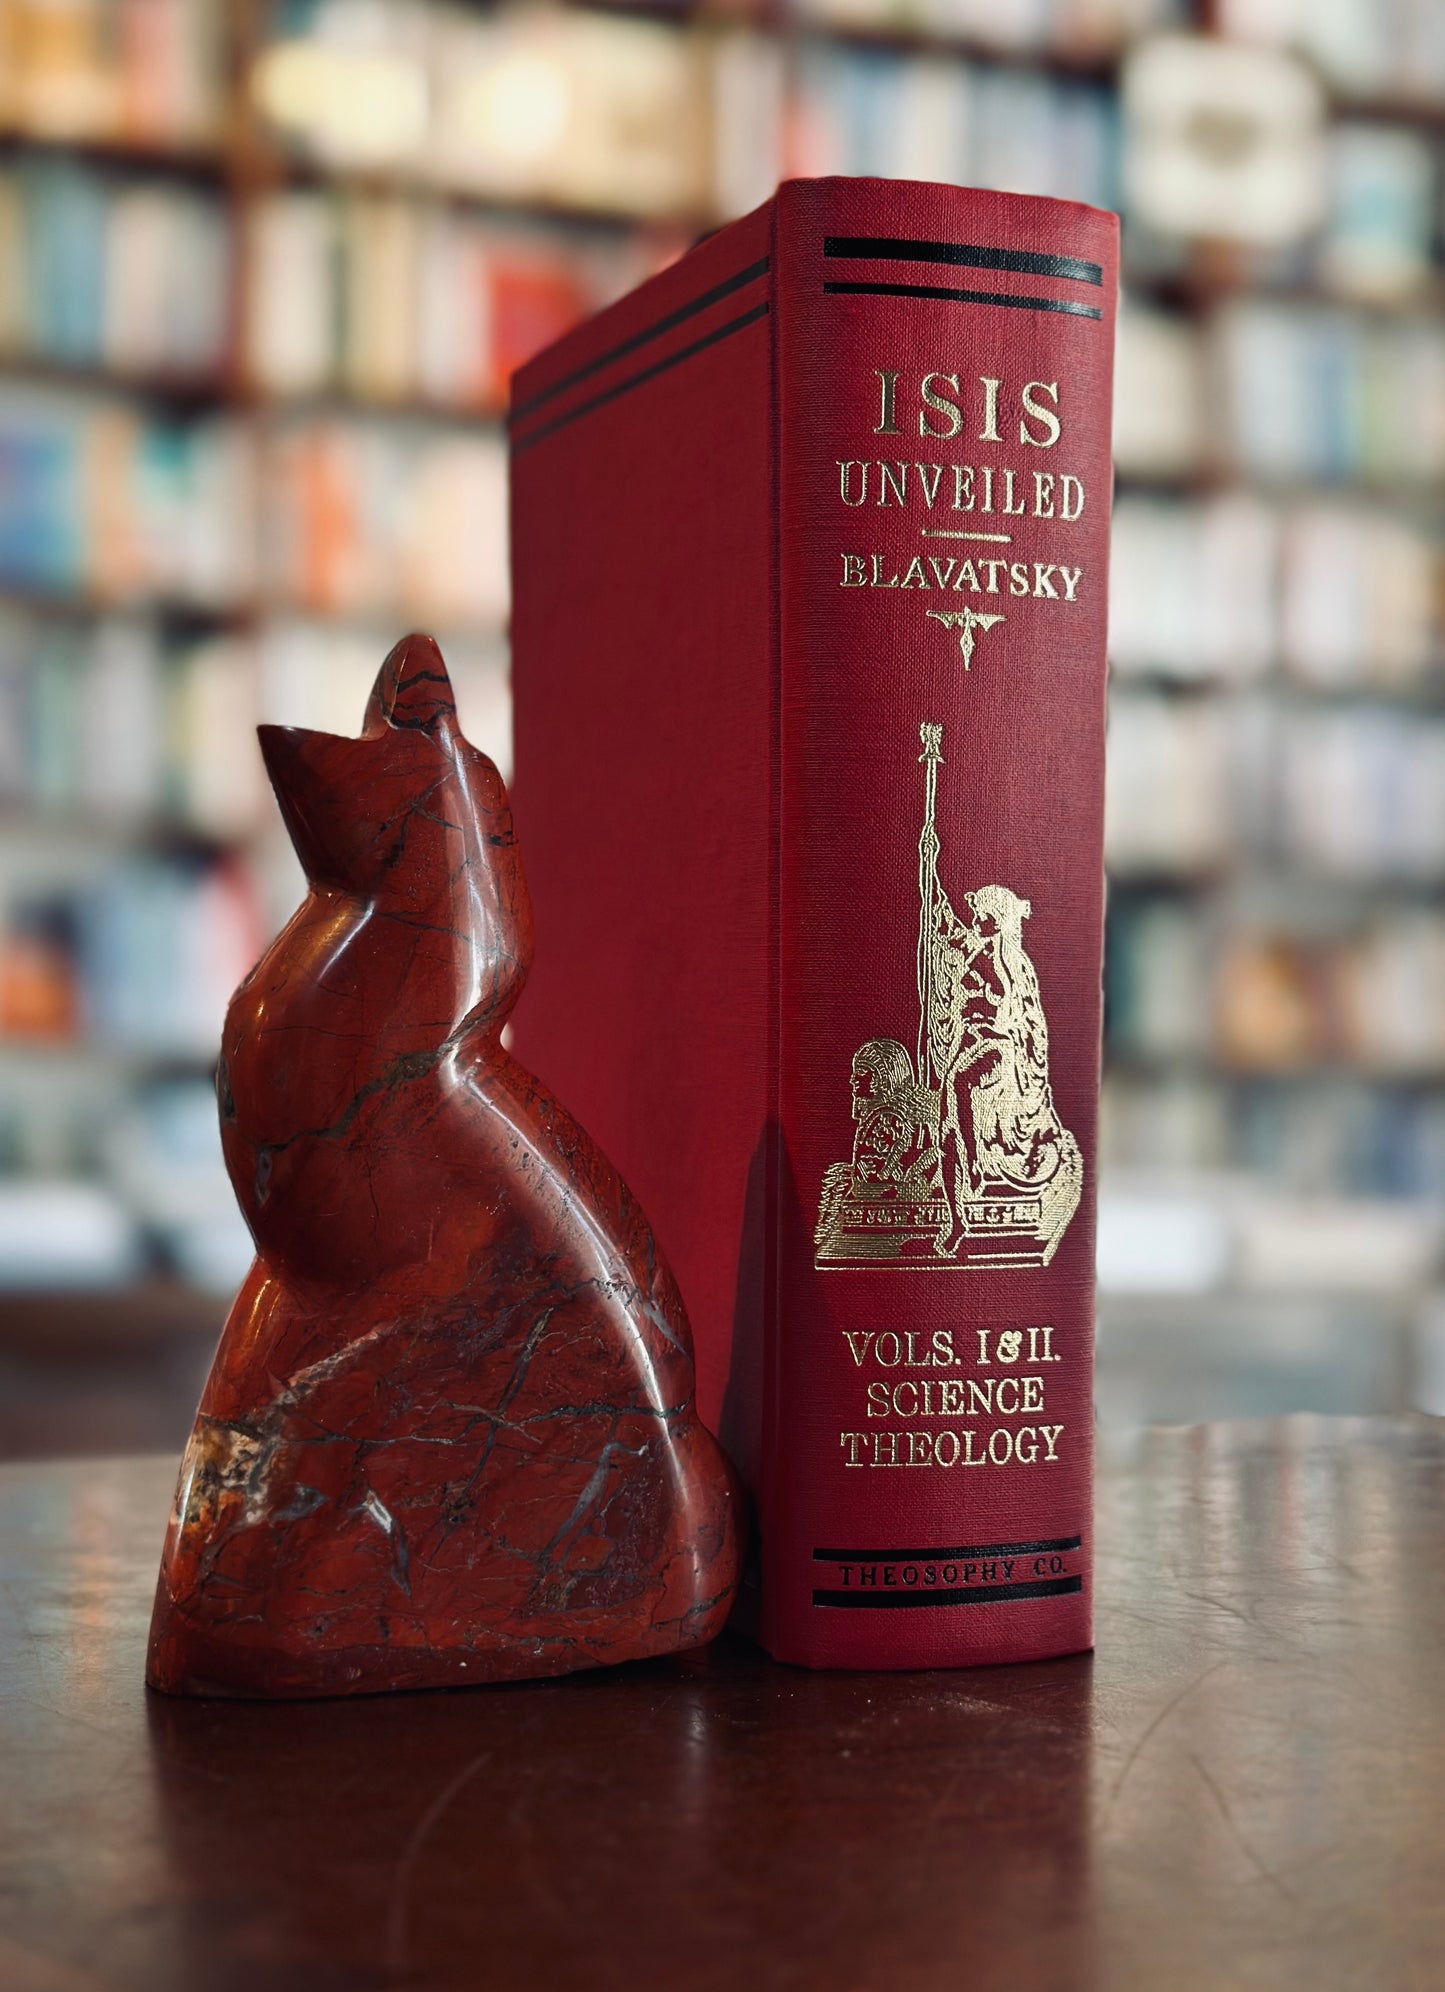 Isis Unveiled by H.P. Blavatsky